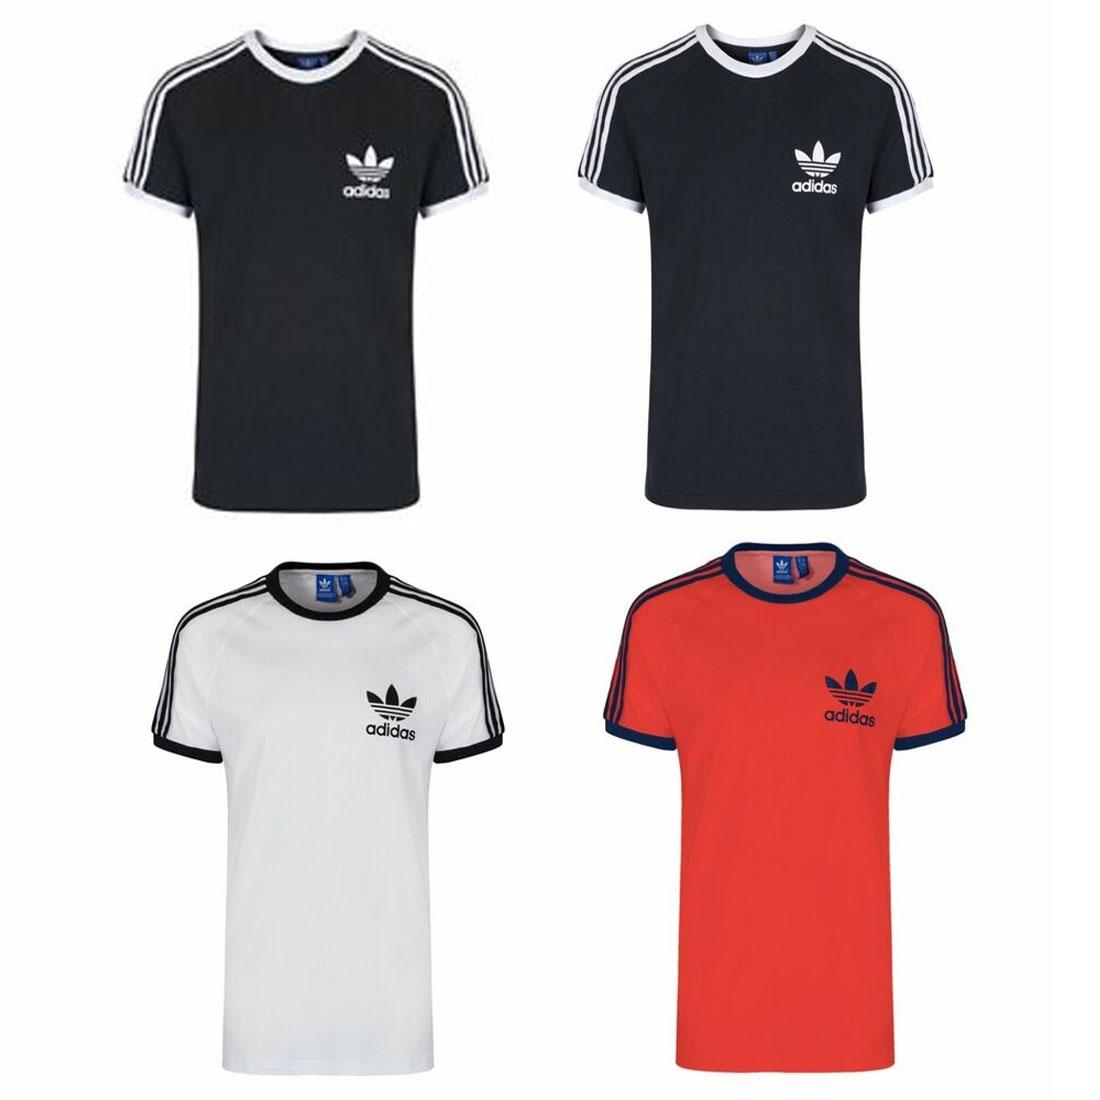 adidas t shirt red and black